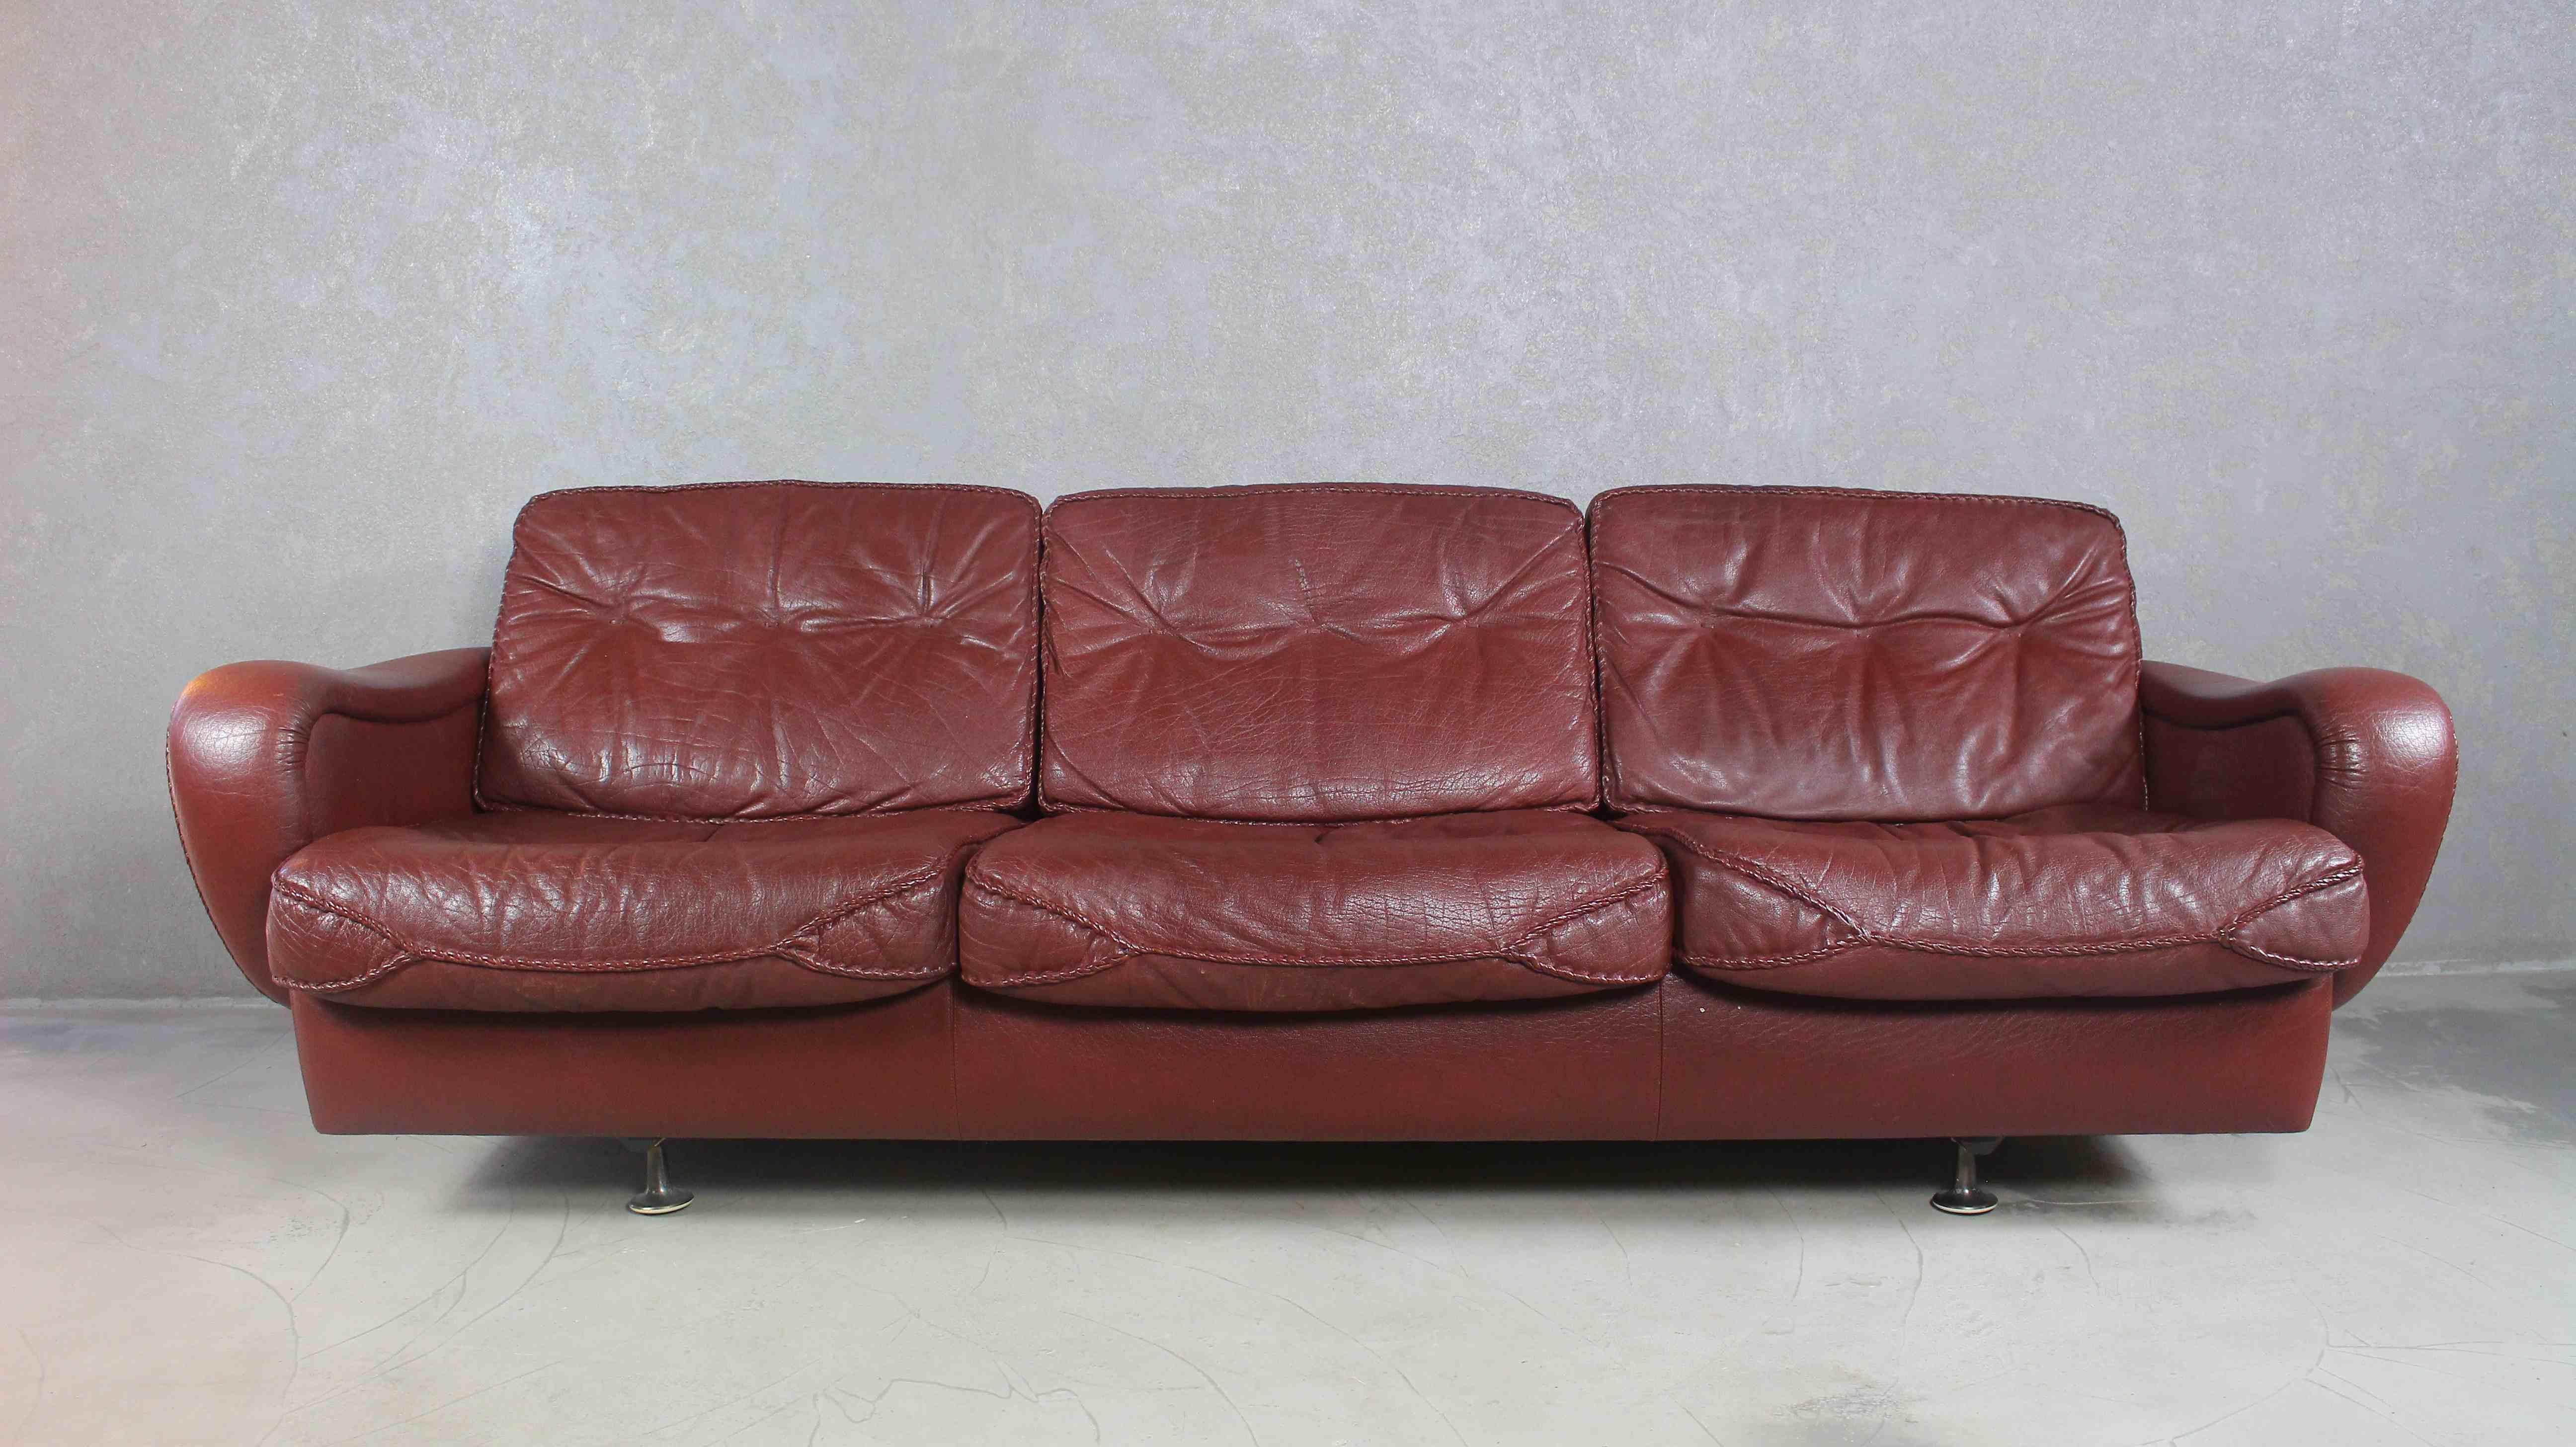 A very stylish Danish 1970s sofa, designed by notable design duo Acton Schubell and IB Madsen.
The sofa is upholstered throughout in genuine textured Buffalo leather, which is Brown in colour.
The backrest cushions feature light button detailing,